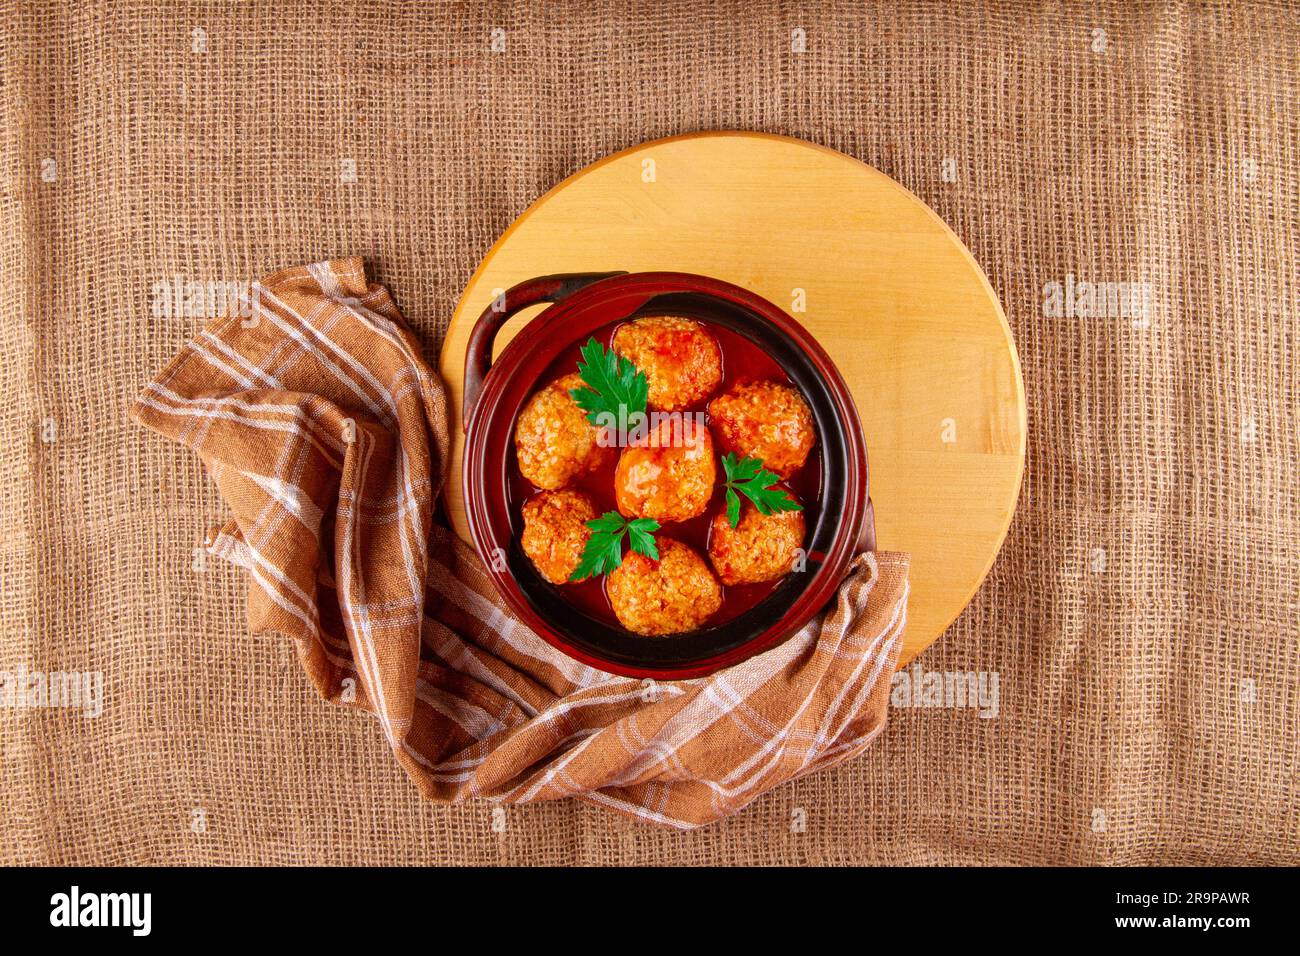 Chicken Meatballs in tomato sauce on sackcloth background with copy space Stock Photo